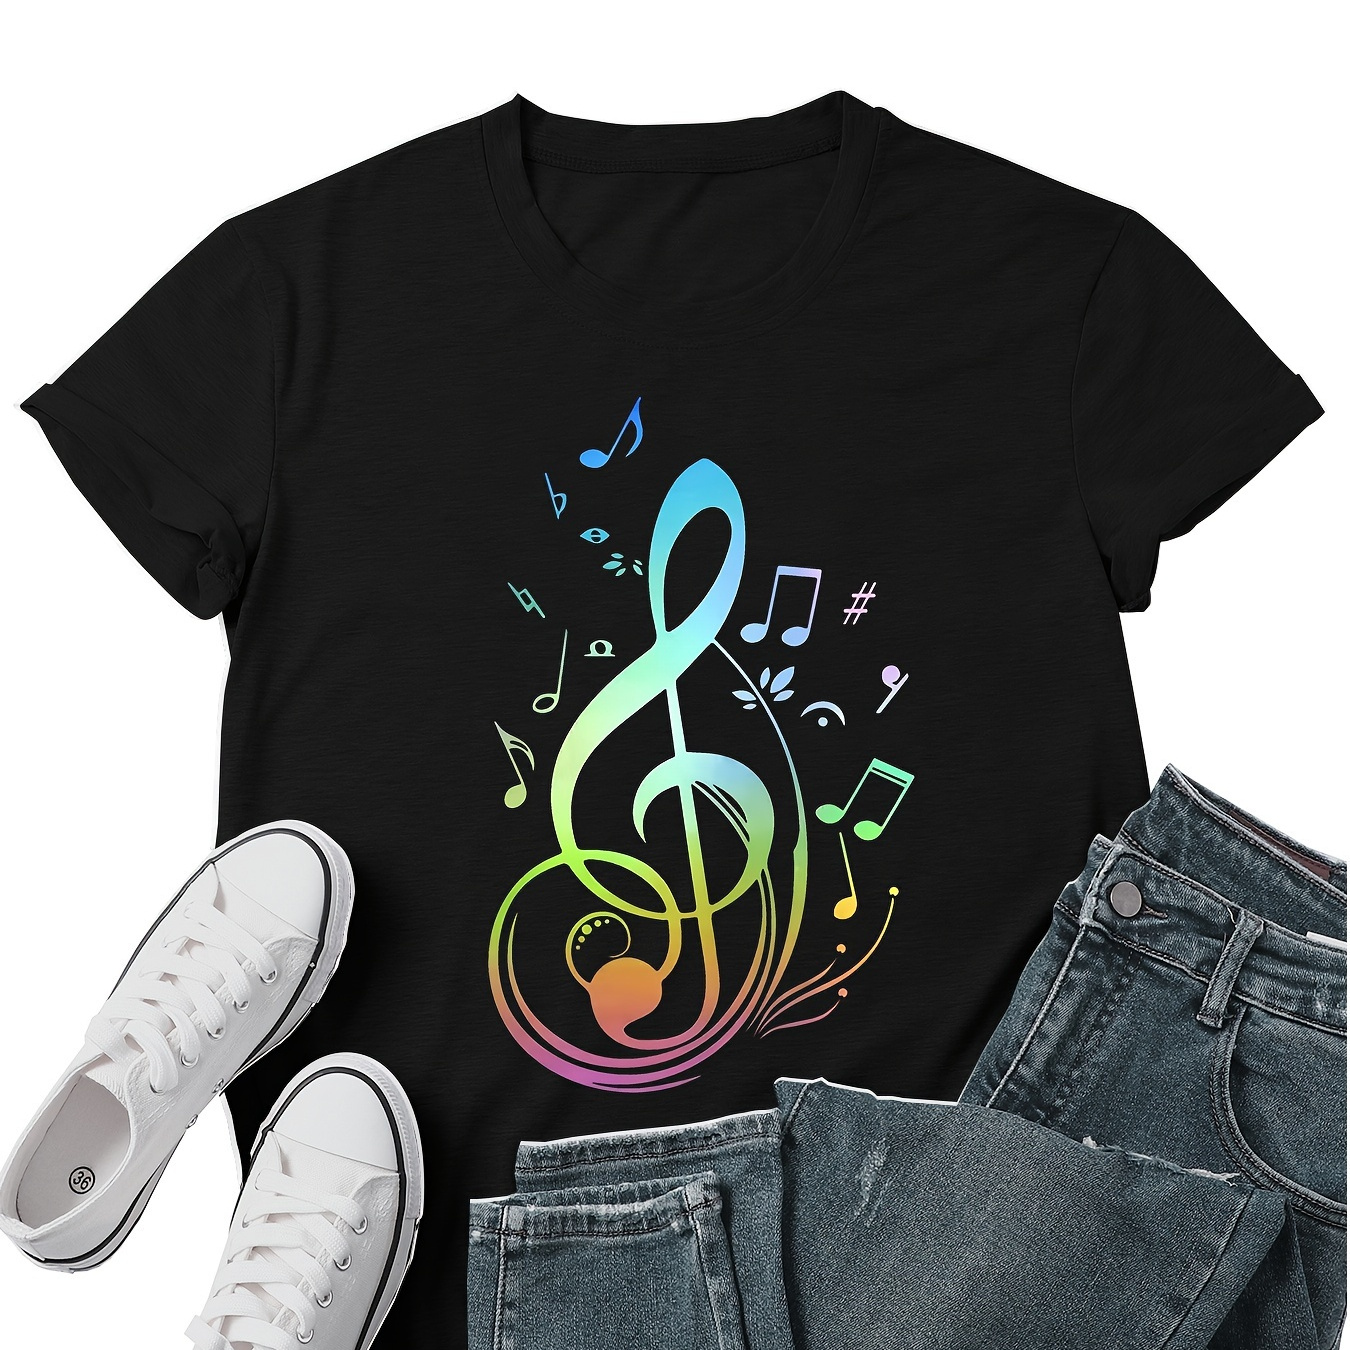 

Musical Note Print T-shirt, Short Sleeve Crew Neck Casual Top For Summer & Spring, Women's Clothing